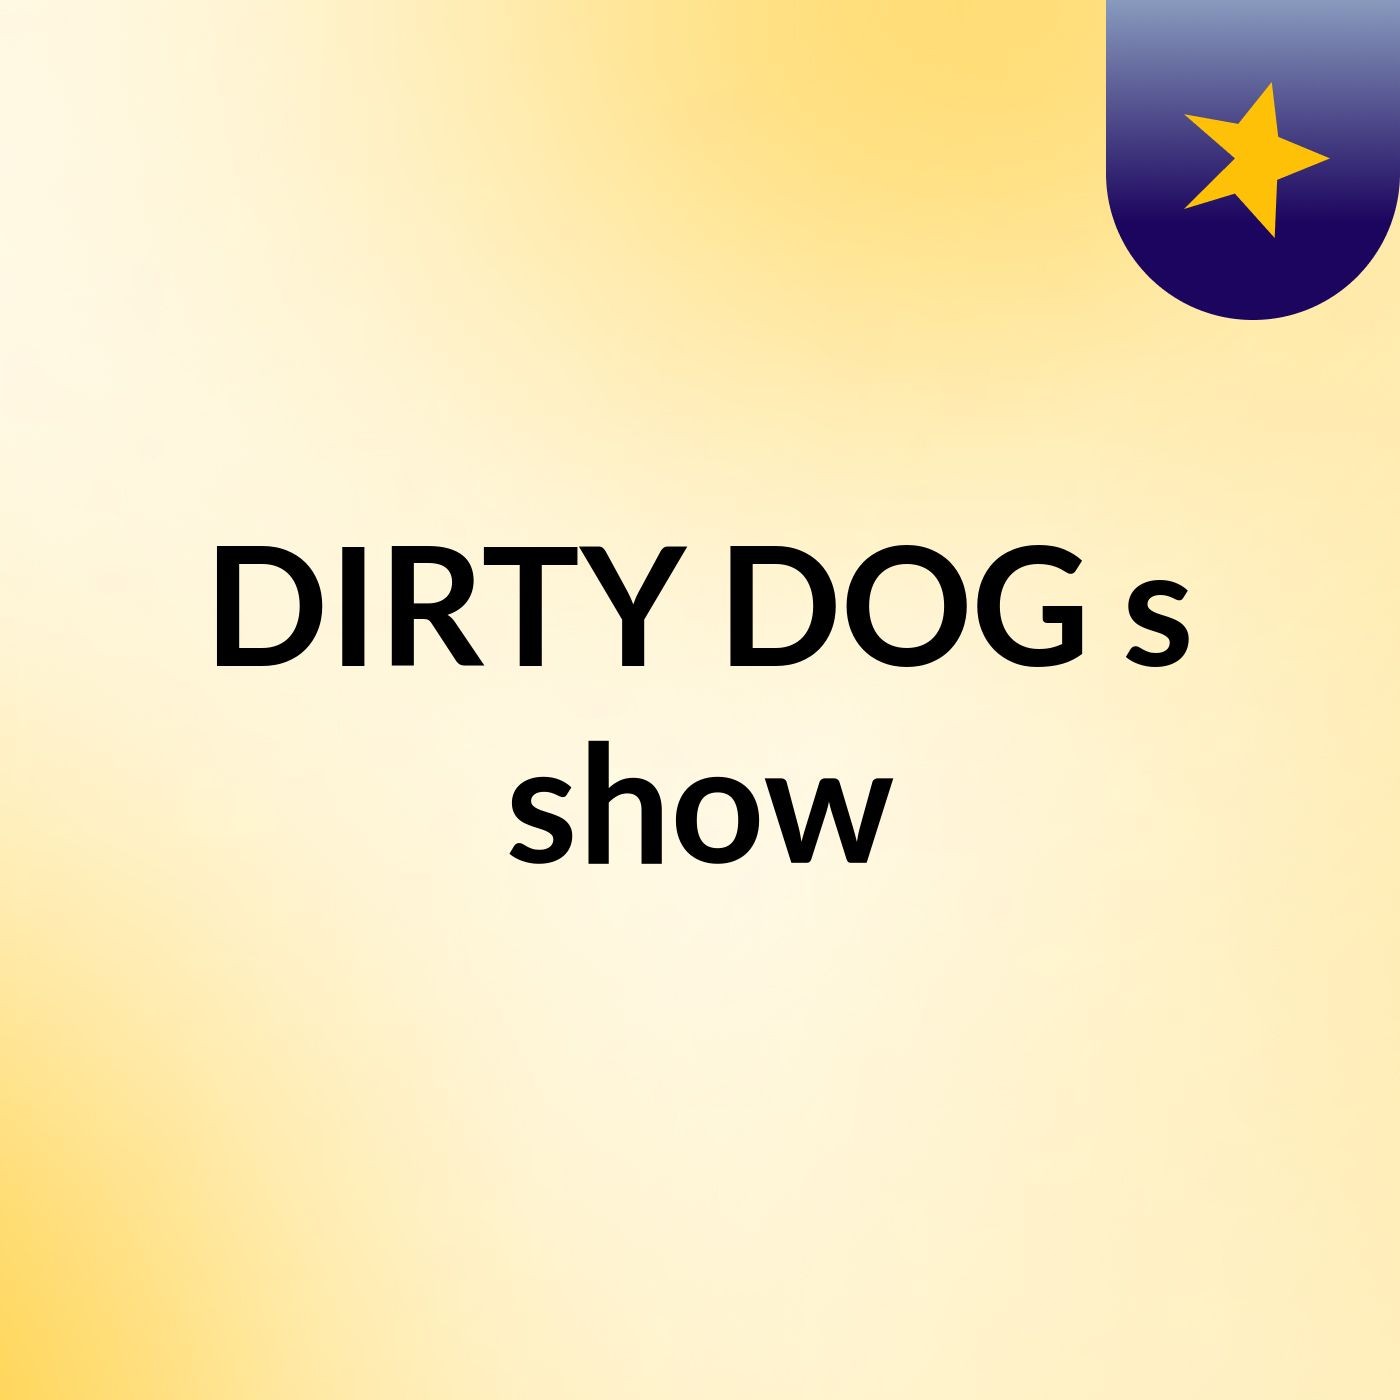 DIRTY DOG's show